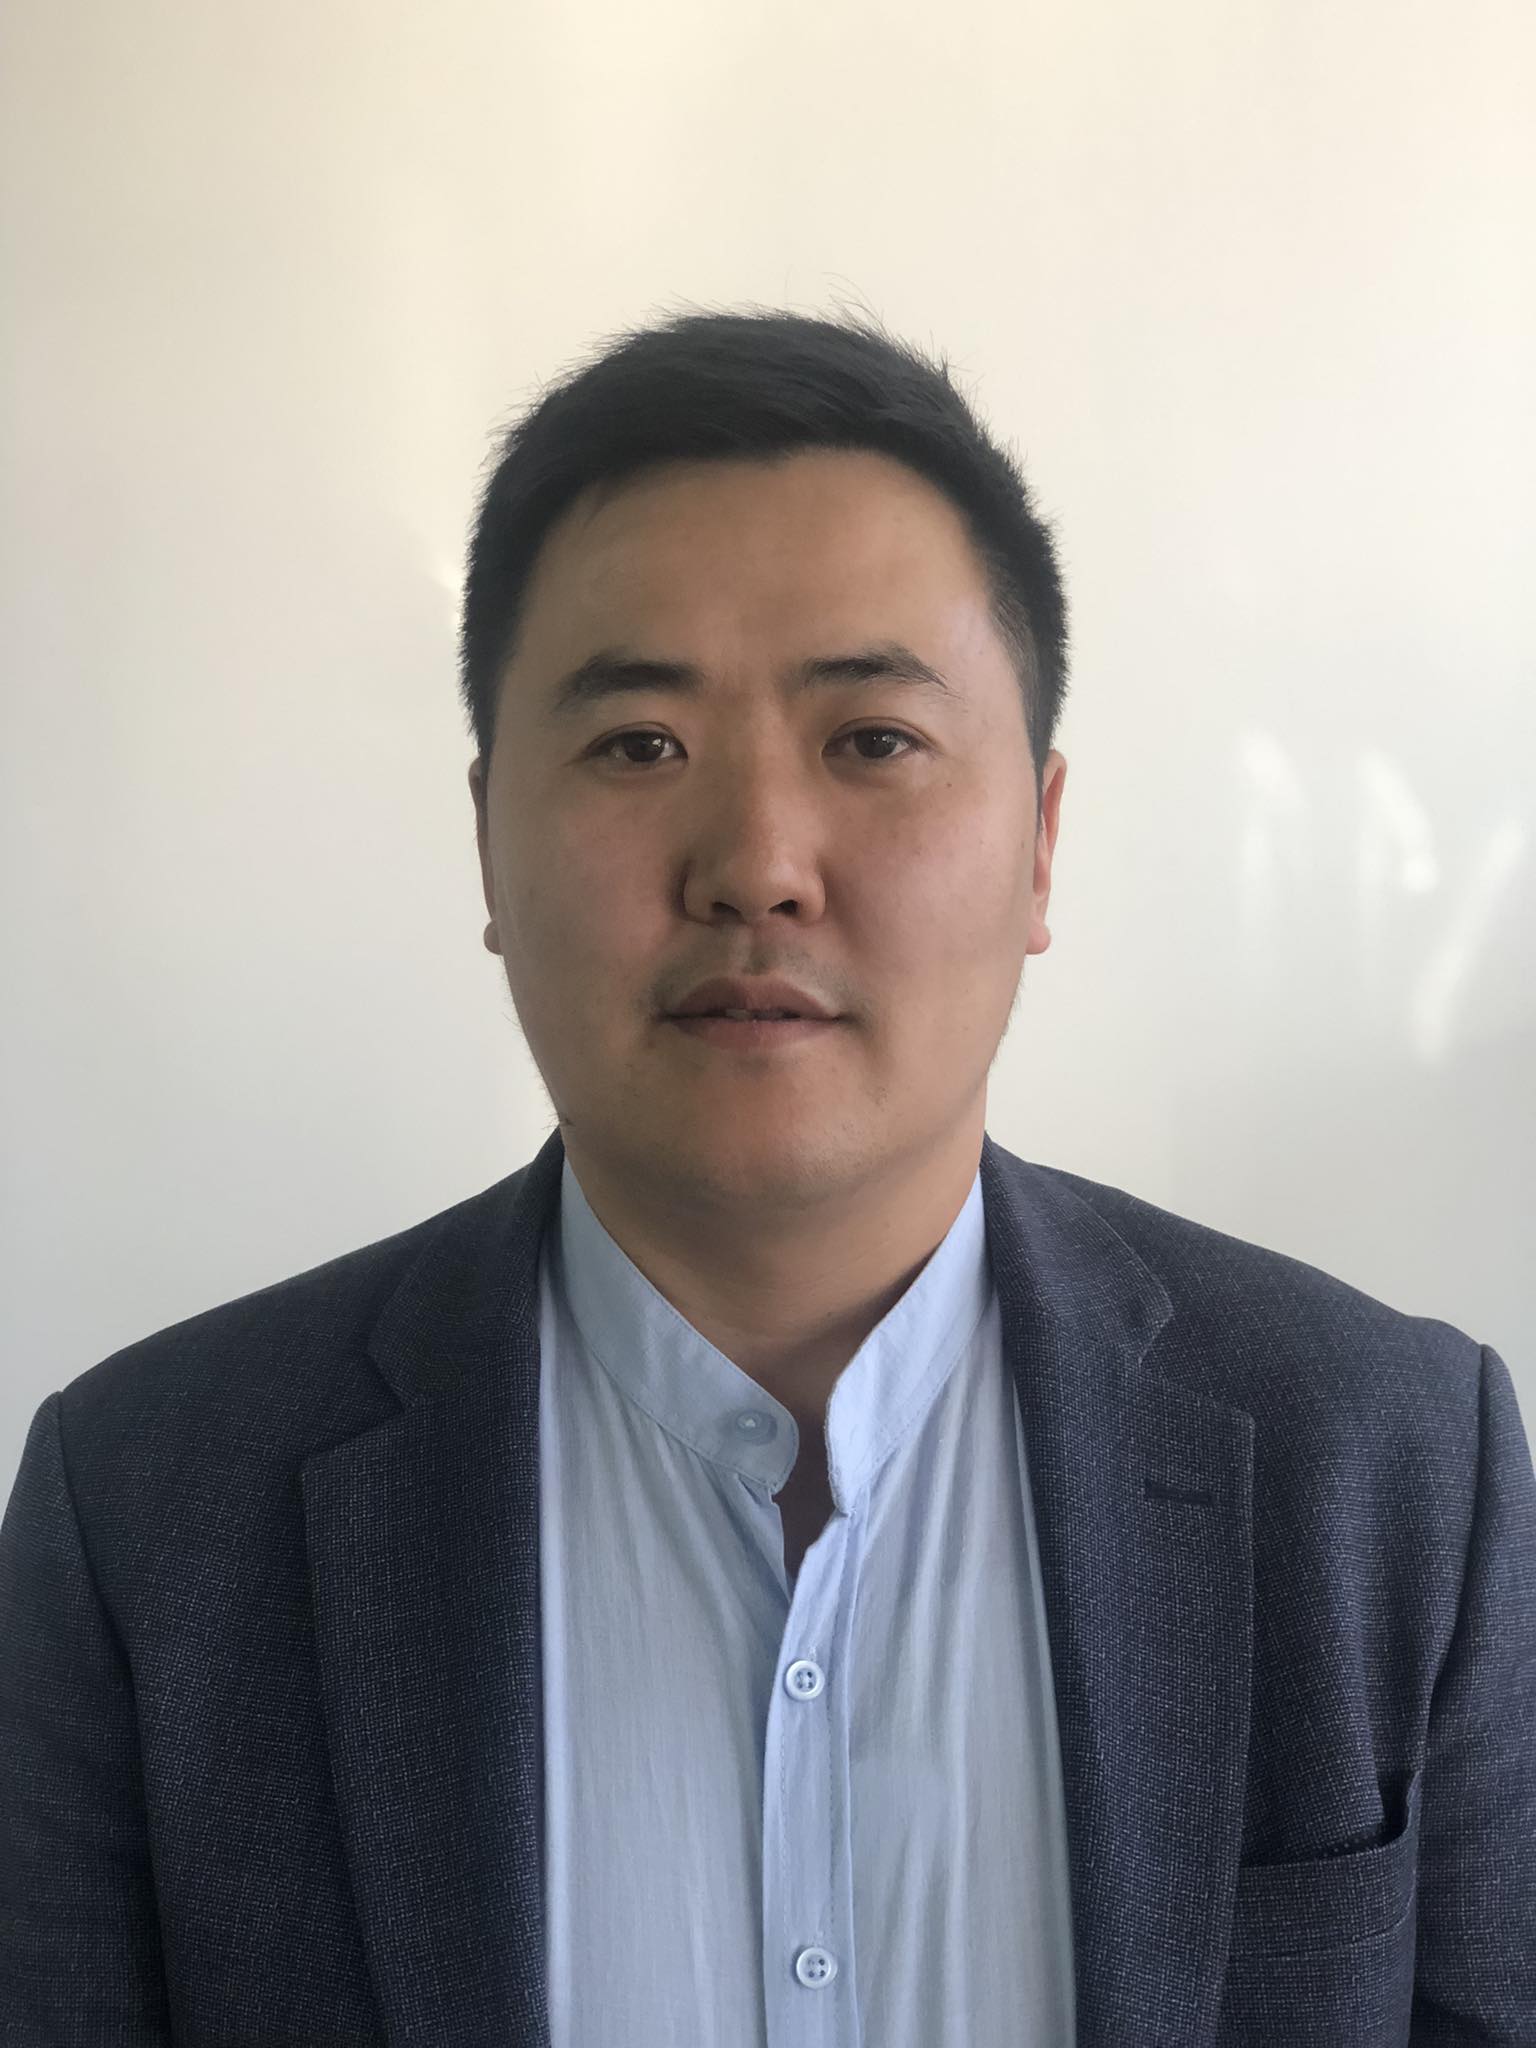 Altangerel Bayarsaikhan, Officer of the Department of Crop Production Coordination and Implementation, Ministry of Food, Agriculture and Light Industry, Mongolia